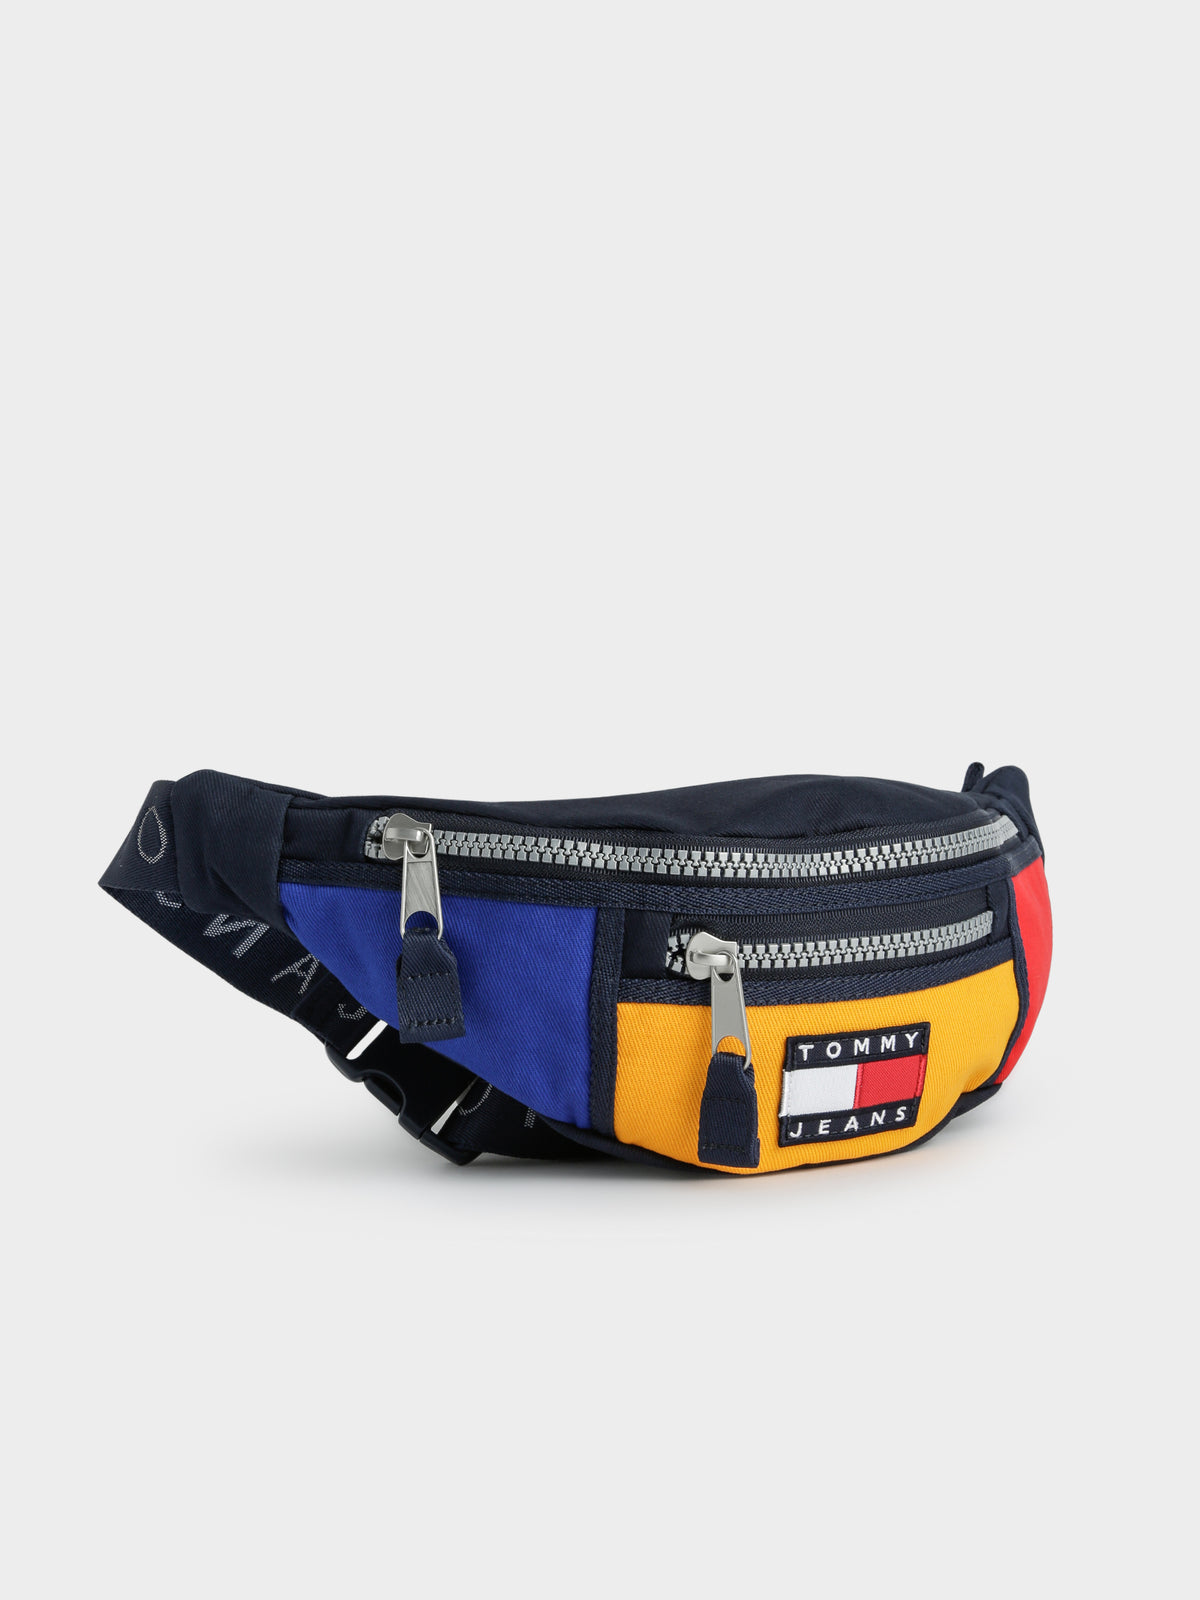 TJM Heritage Bumbag in Yellow Red &amp; Blue